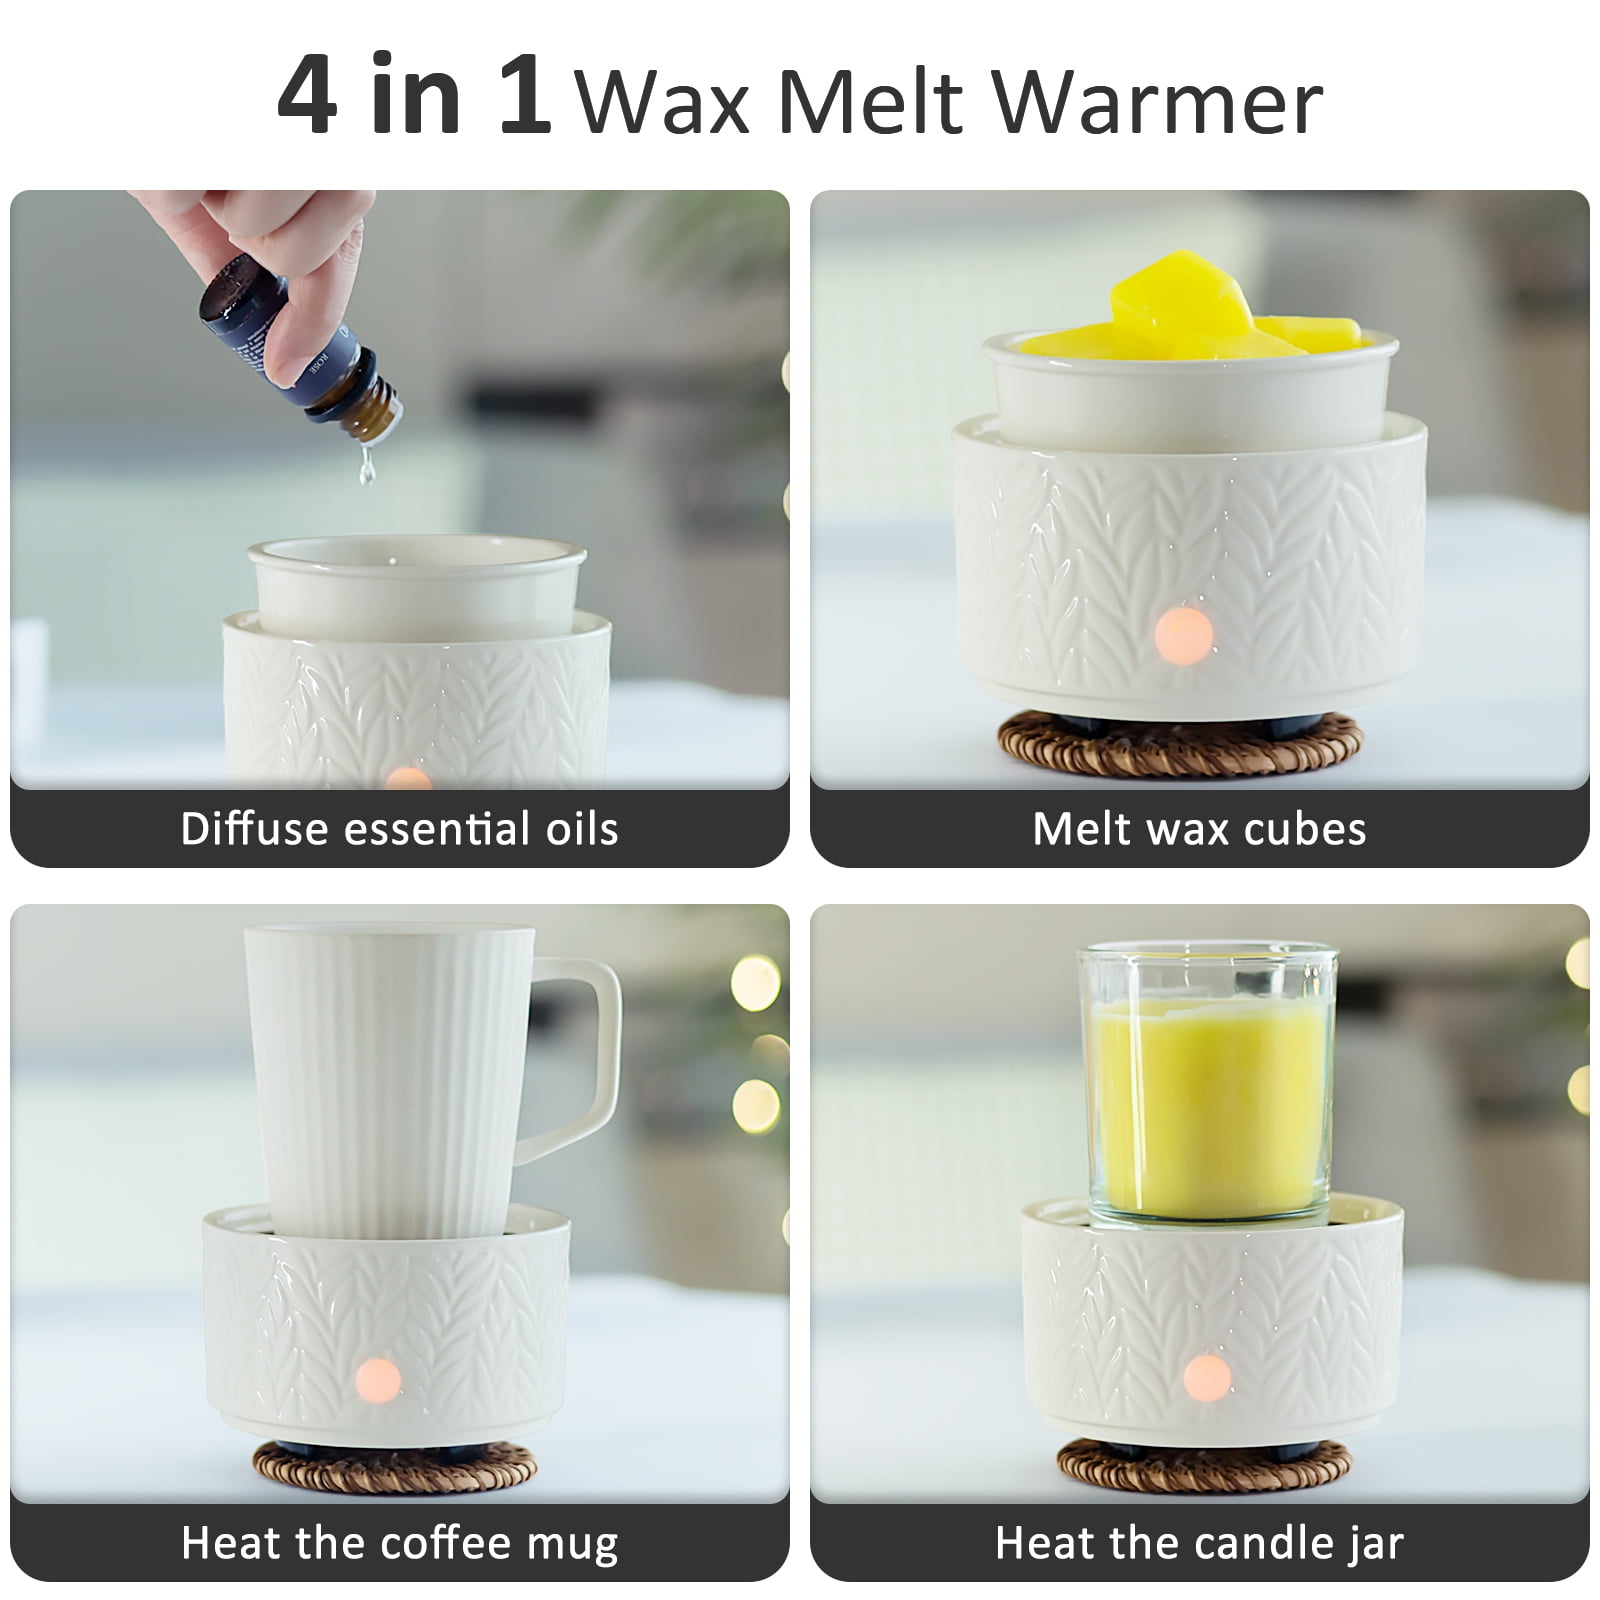 Kobodon Wax Melt Warmer, Candle Wax Warrmer for Scented Wax Burner, 3-in-1 Ceramic Wax Melter Warmer Electric Wax Melts Wax Cubes for Home Office